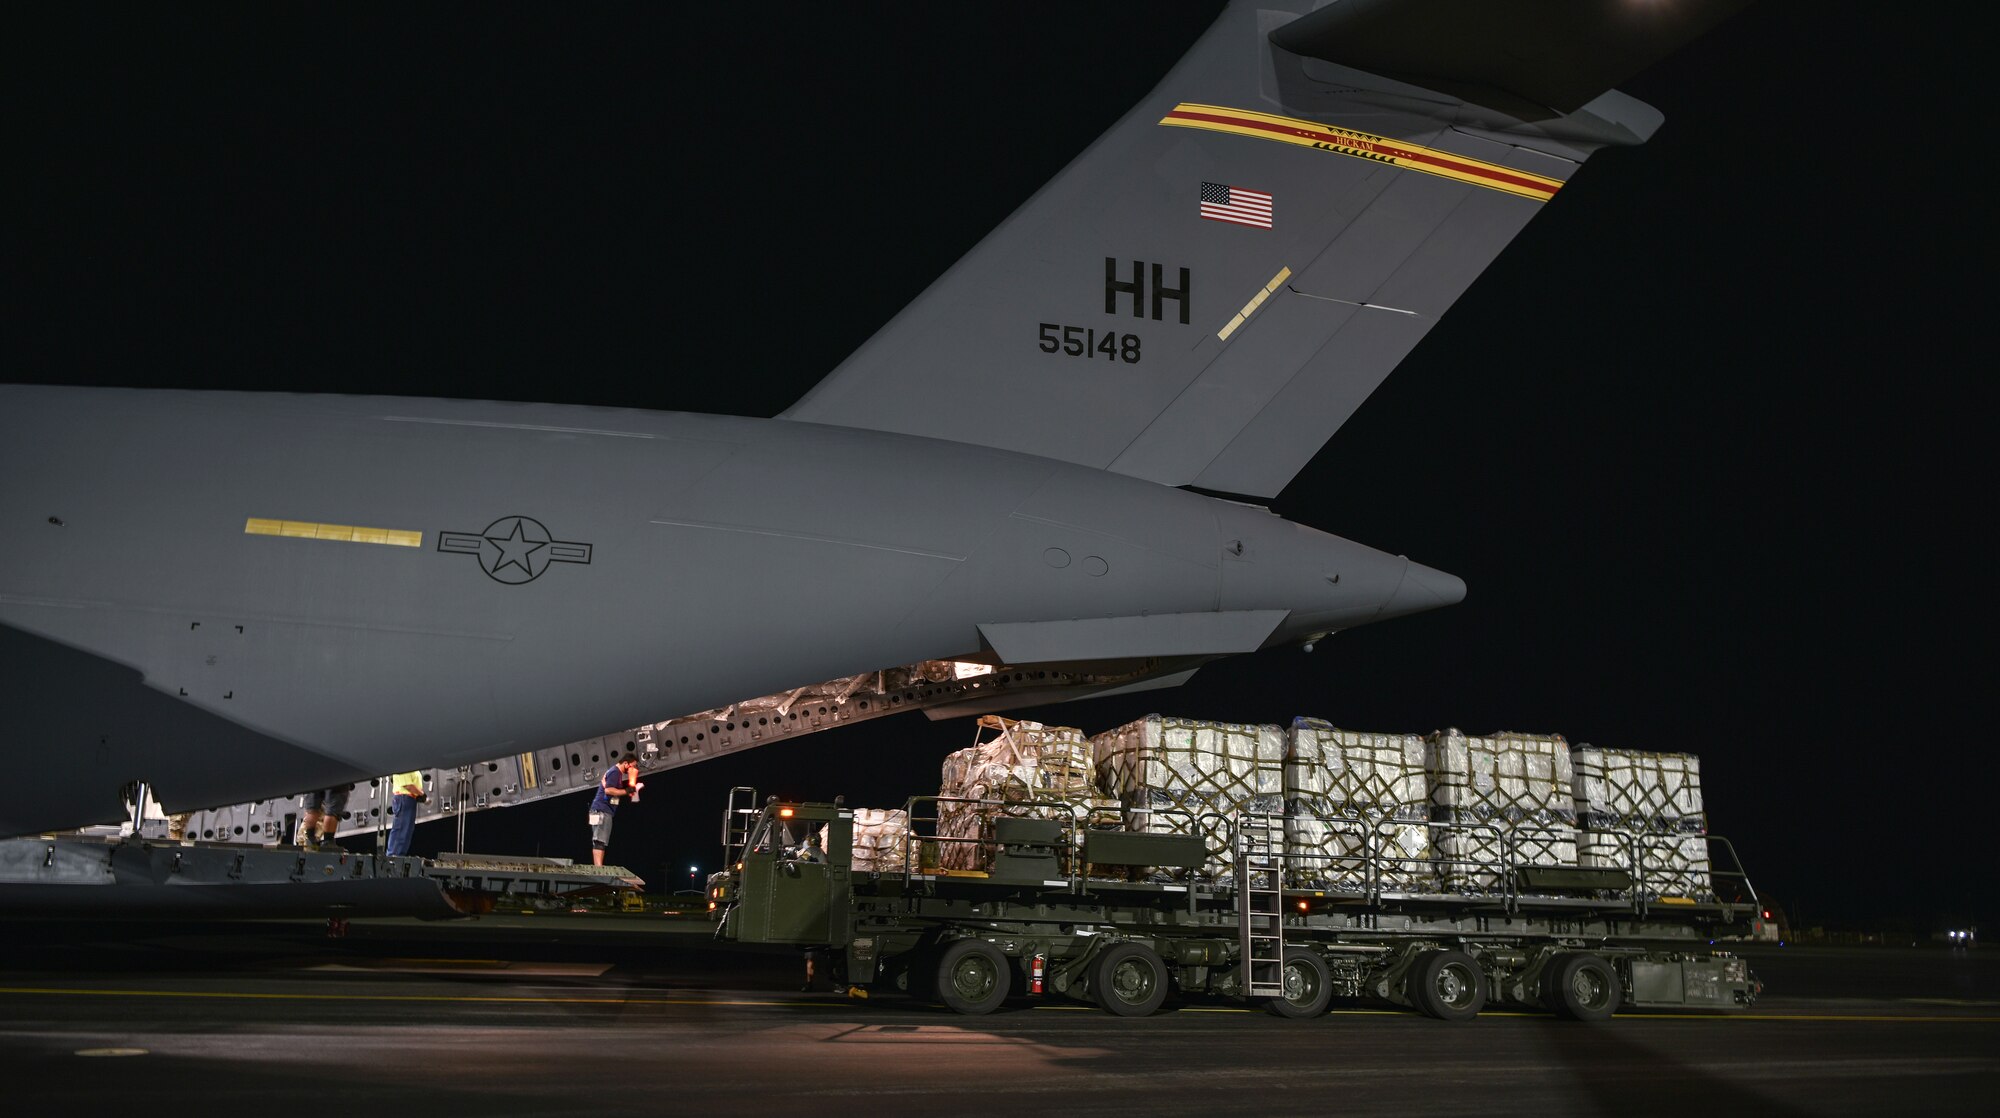 U.S. Air Force Airmen and civilians from the 735th Air Mobility Squadron load COVID-19 personal protective equipment and medical supplies onto a C-17 Globemaster III from the 535th Airlift Squadron at Joint Base Pearl Harbor-Hickam, Hawaii, April  3, 2020. The 735th Air Mobility Squadron loaded 31,063 pounds of cargo containing COVID-19 personal protective equipment and medical supplies from the CDC and FEMA that were delivered to the Mariana Islands.   (U.S. Air Force photo by Tech. Sgt. Anthony Nelson Jr.)